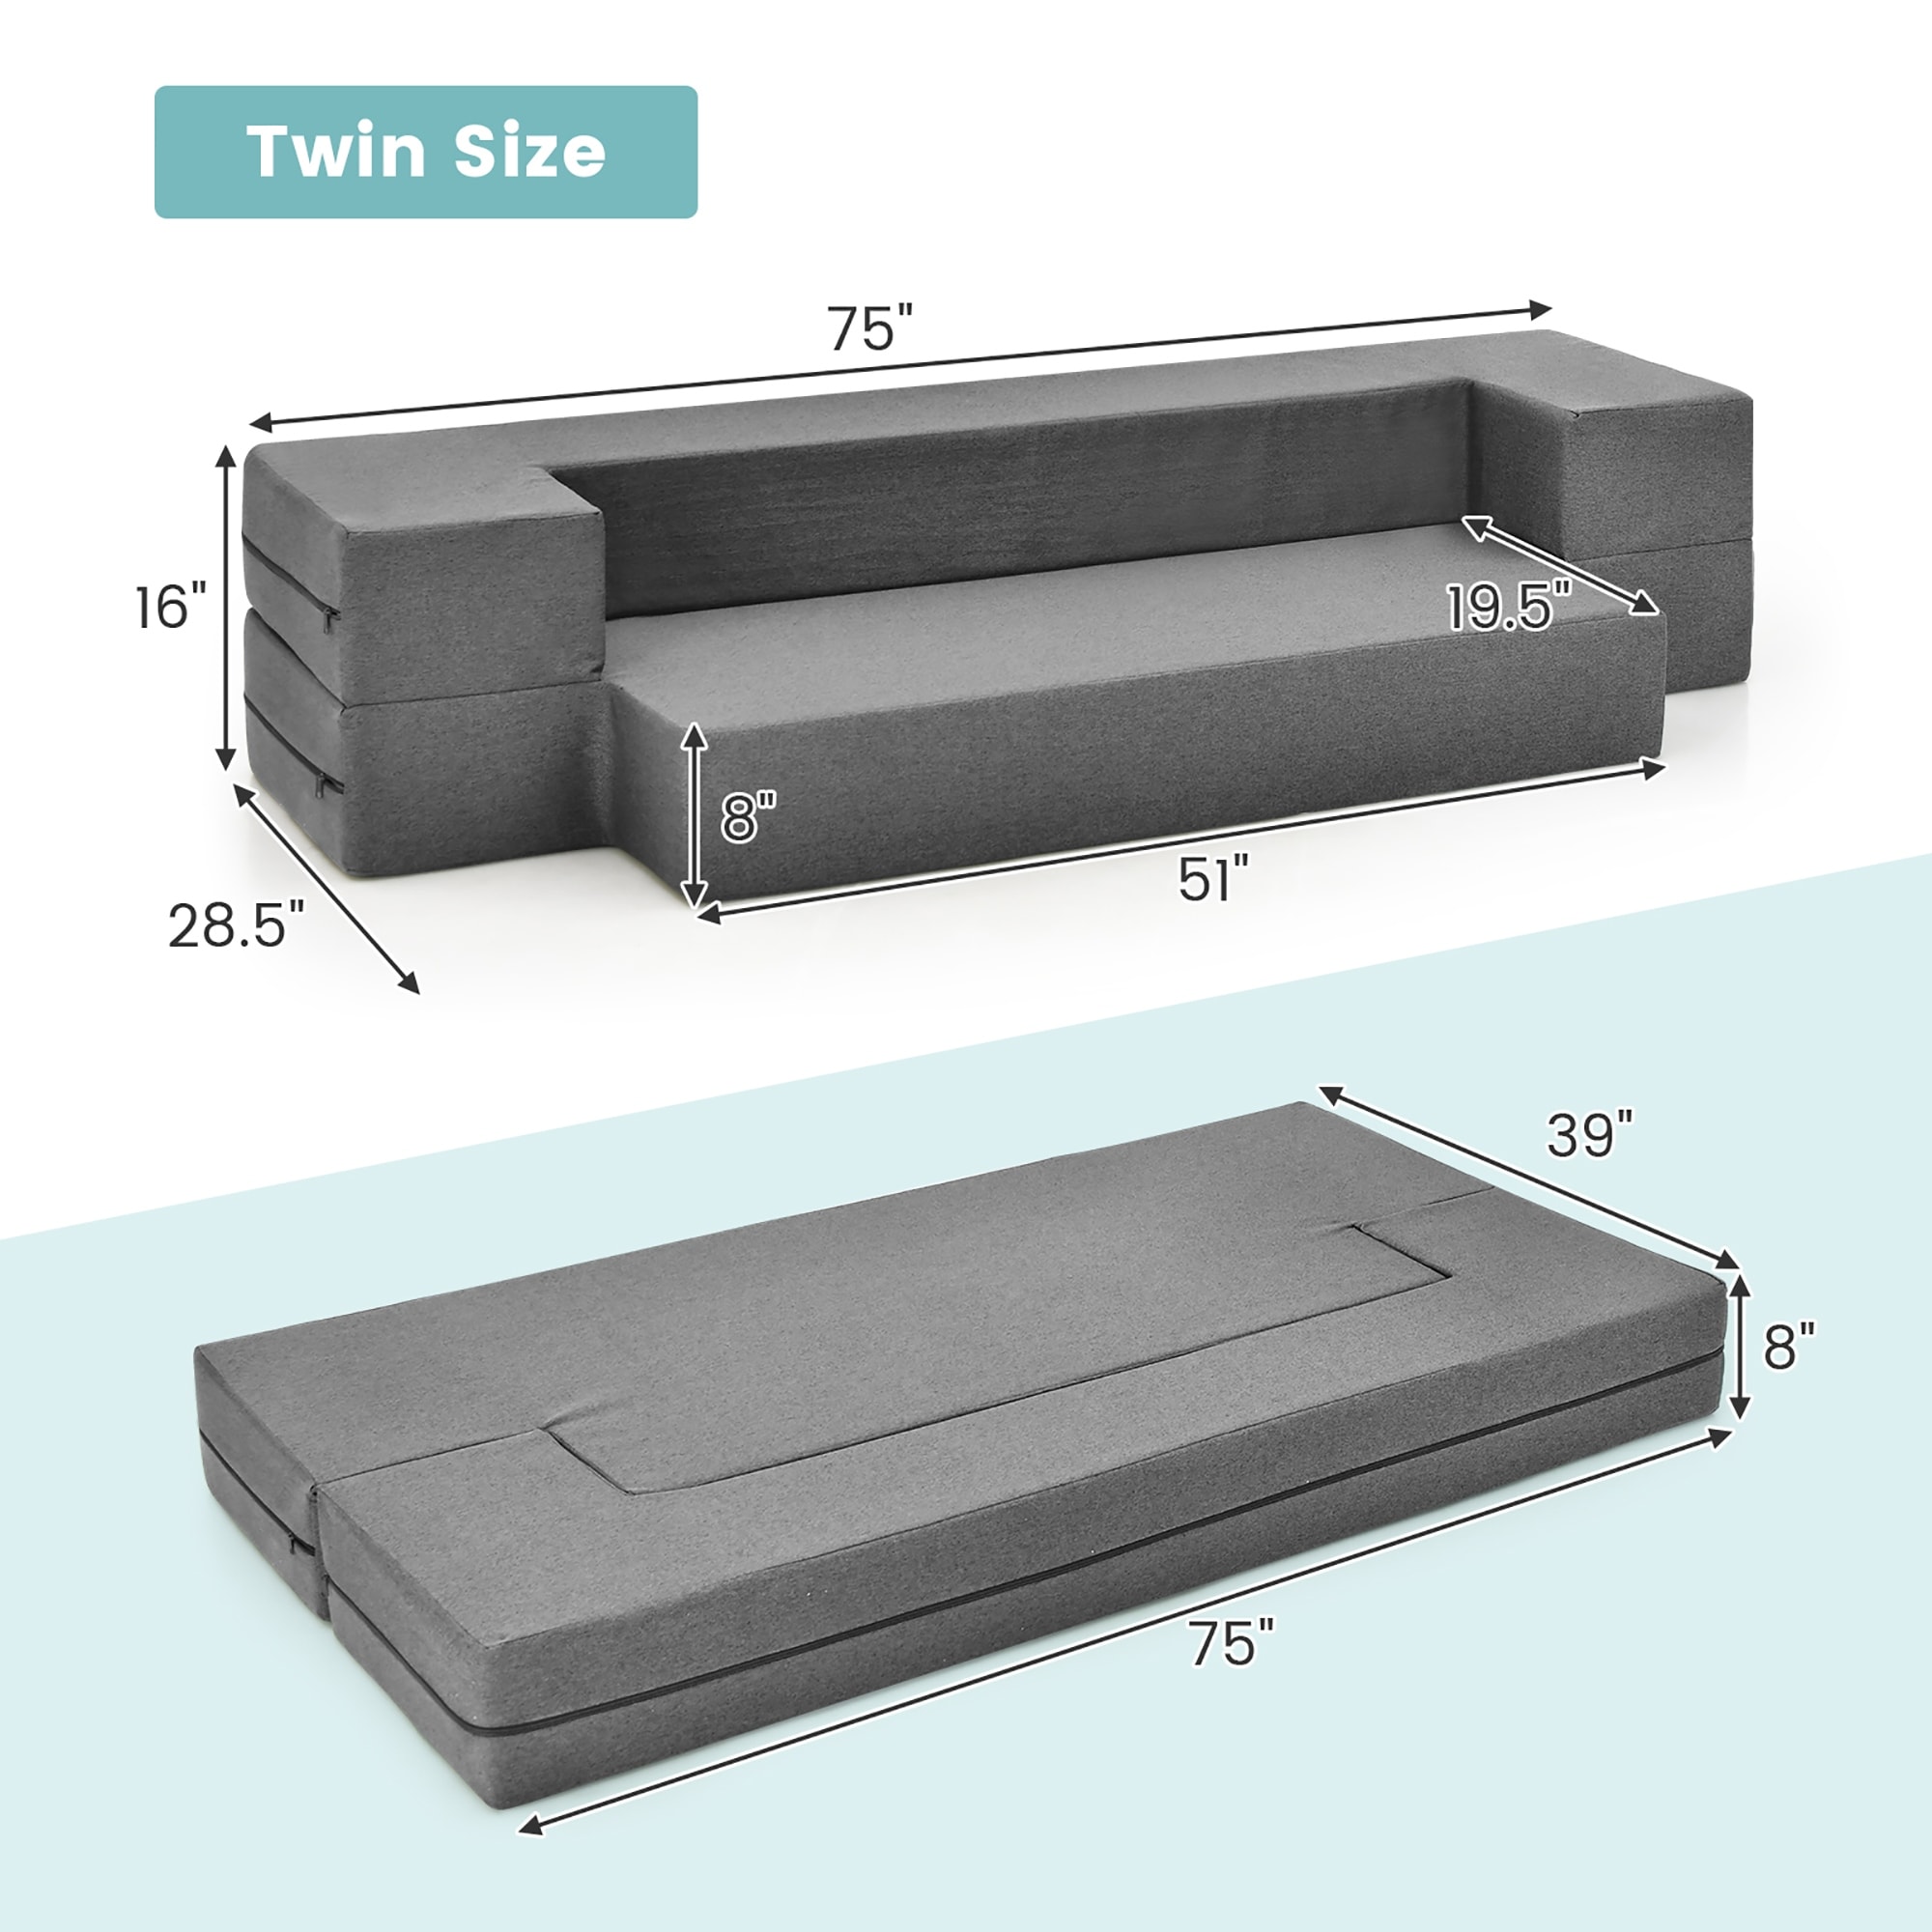 https://ak1.ostkcdn.com/images/products/is/images/direct/47d97ece45d017cb41a4da50aab88cd746cb1131/Costway-8-Inch-Queen-Folding-Sofa-Couch-Bed-Convertible-Floor-Couch.jpg